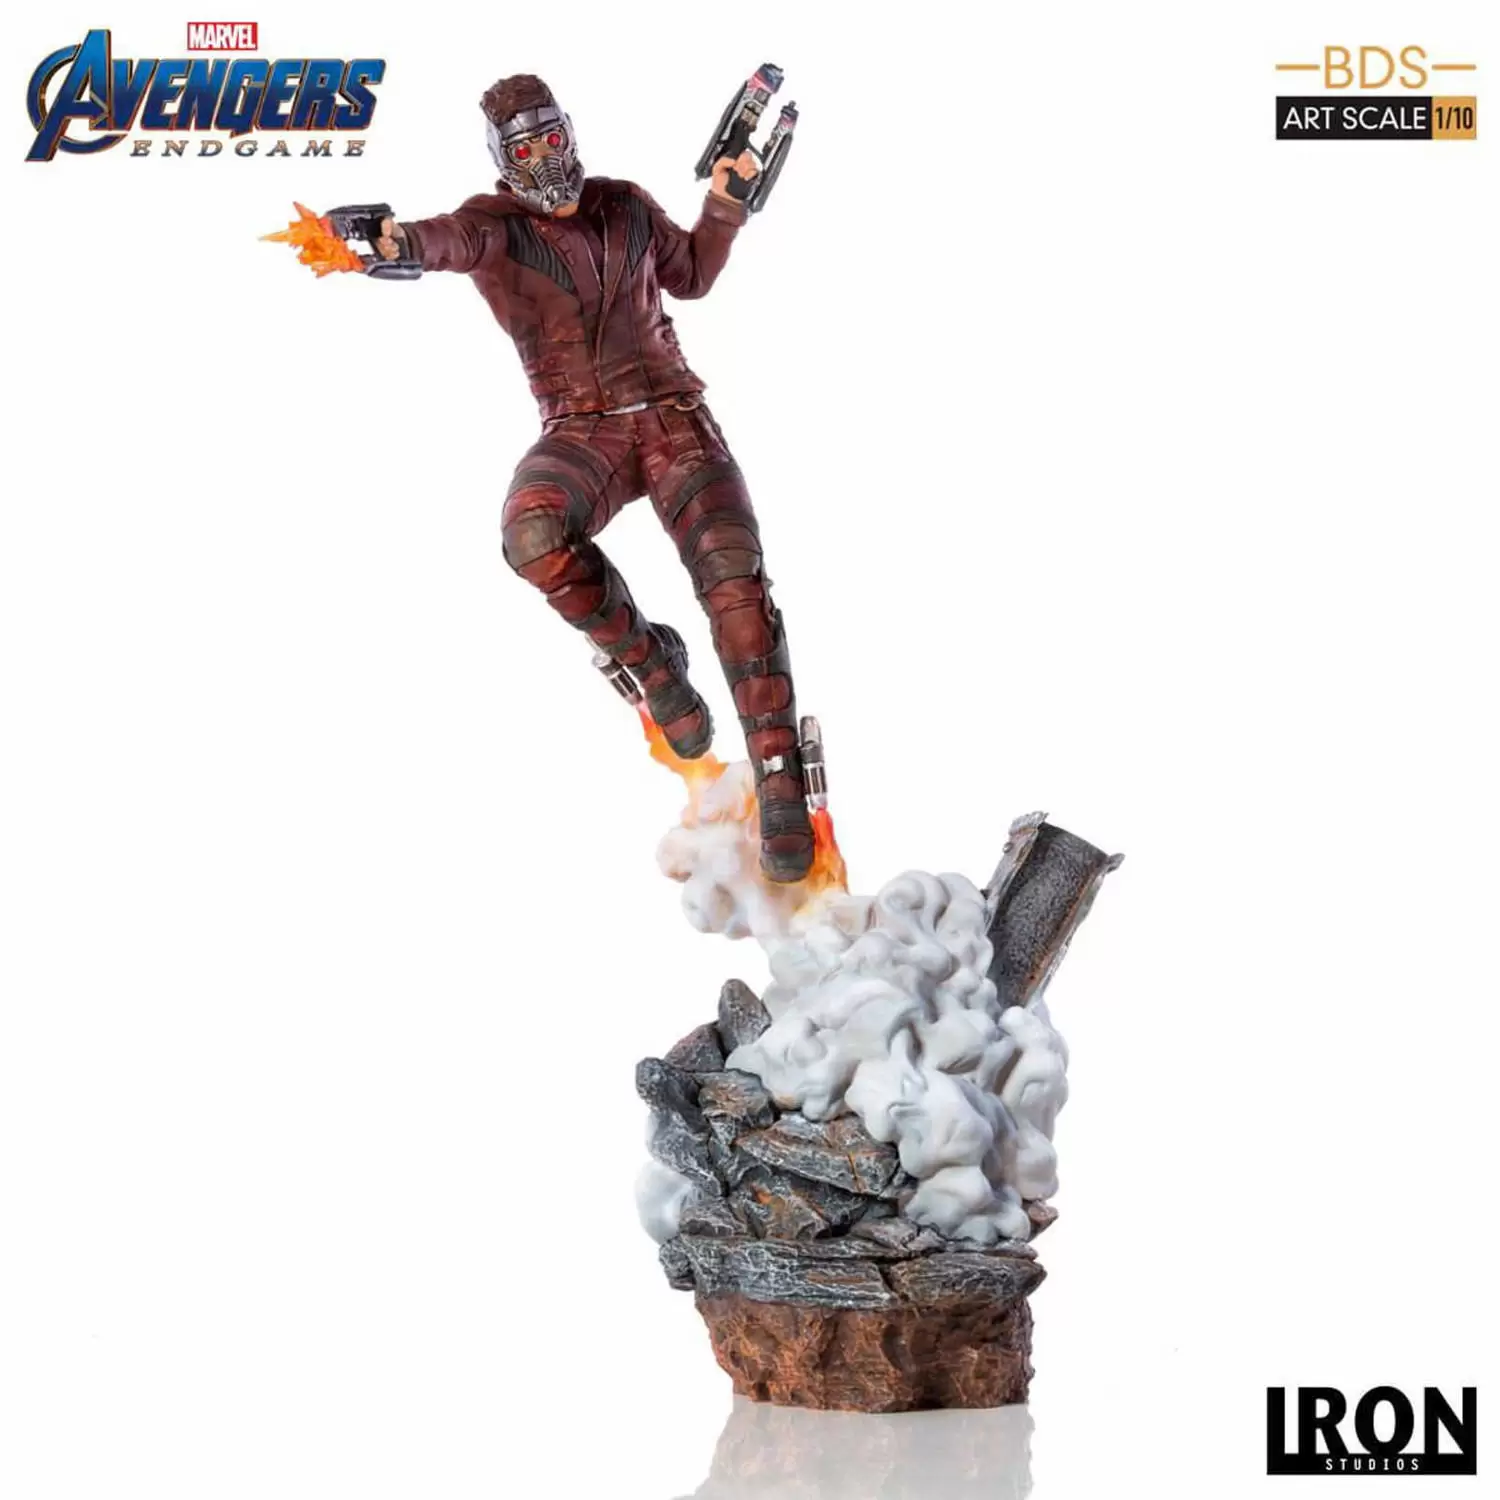 Iron Studios - Avengers: Endgame - Star-Lord - BDS Art Scale 